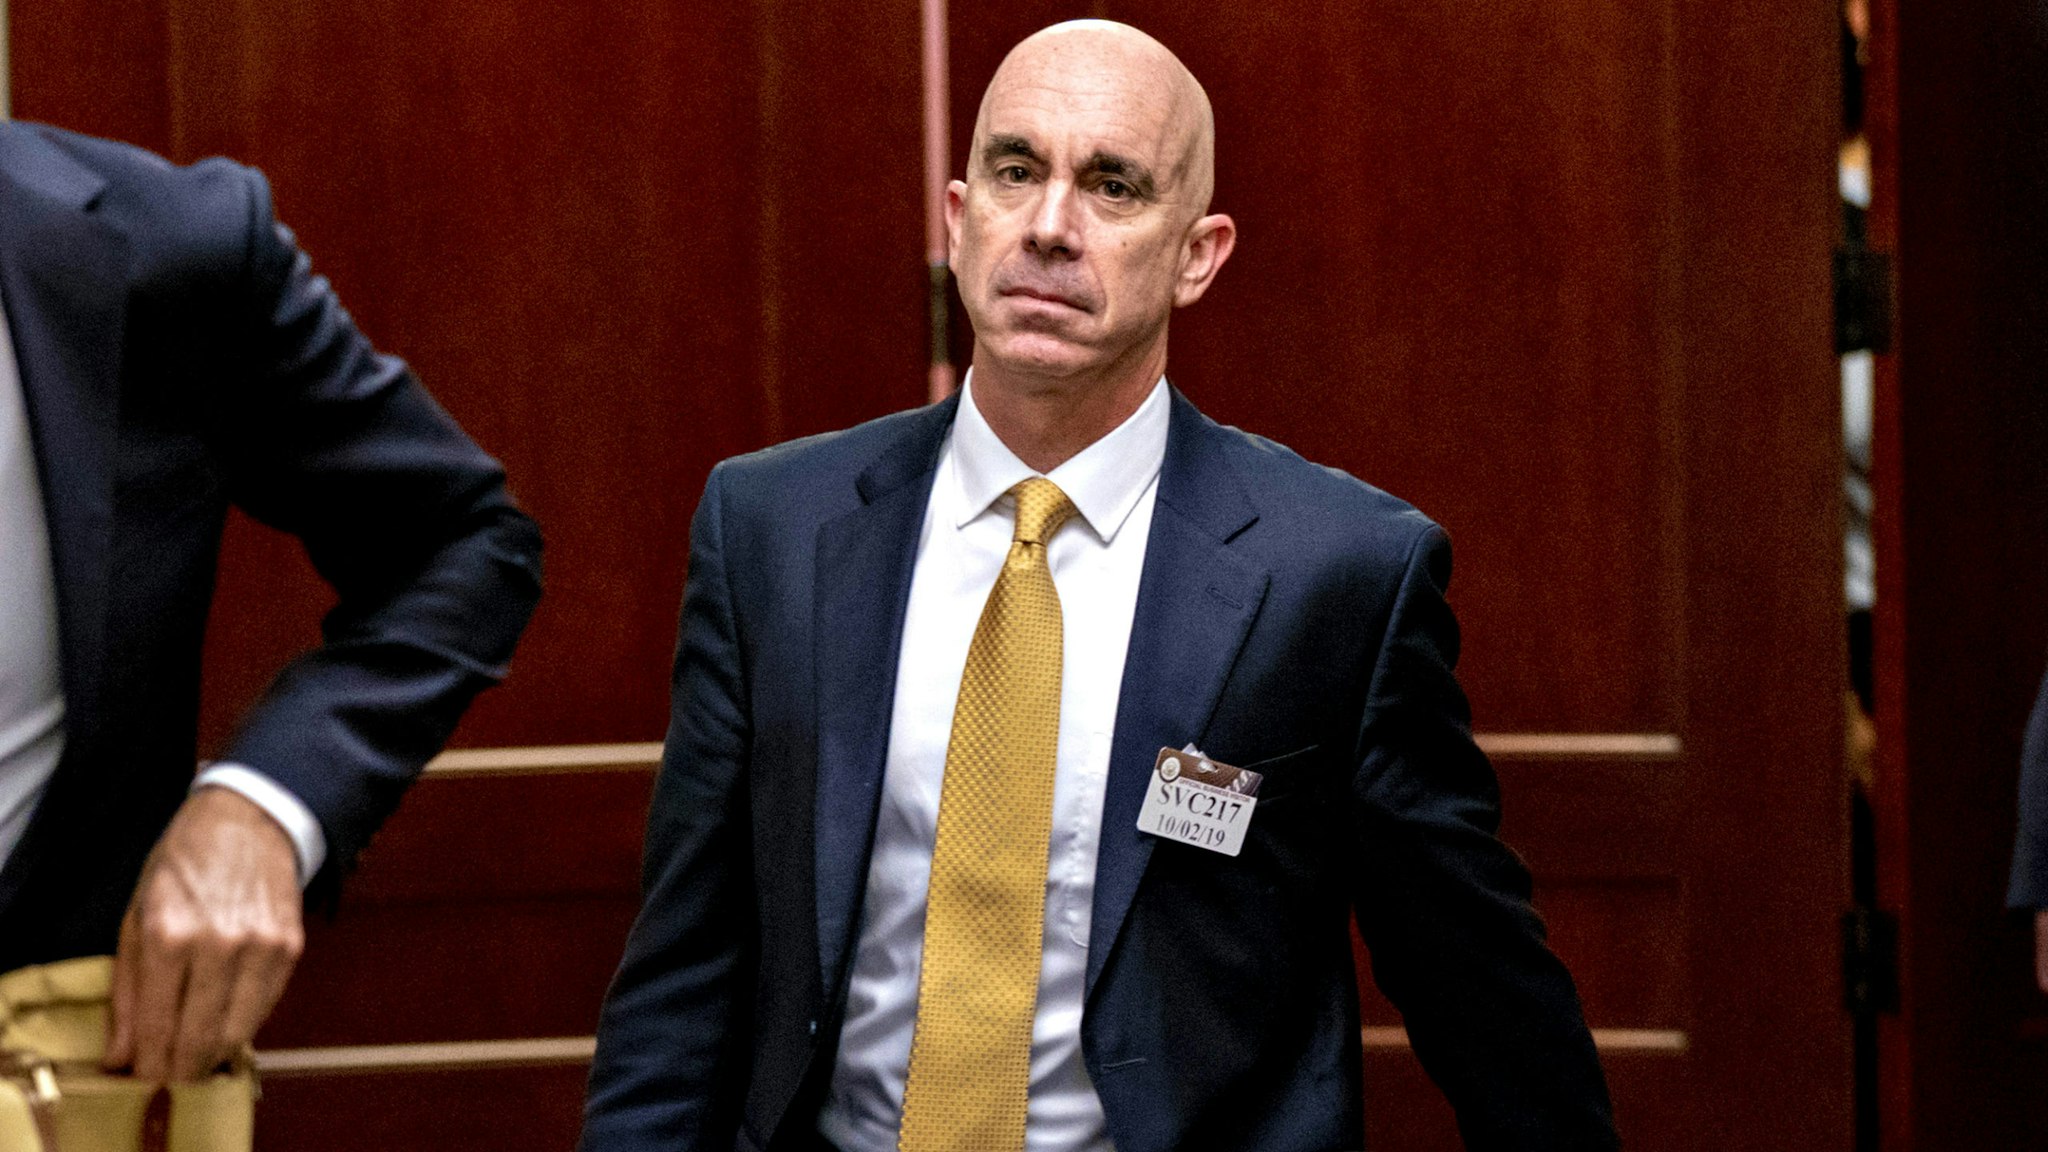 Steve Linick, State Department inspector general, exits after closed-door testimony on Capitol Hill in Washington, D.C., U.S., on Wednesday, Oct. 2, 2019. Linick briefed lawmakers privately on efforts inside the department to punish officials who cooperate with the House impeachment inquiry of President Donald Trump.